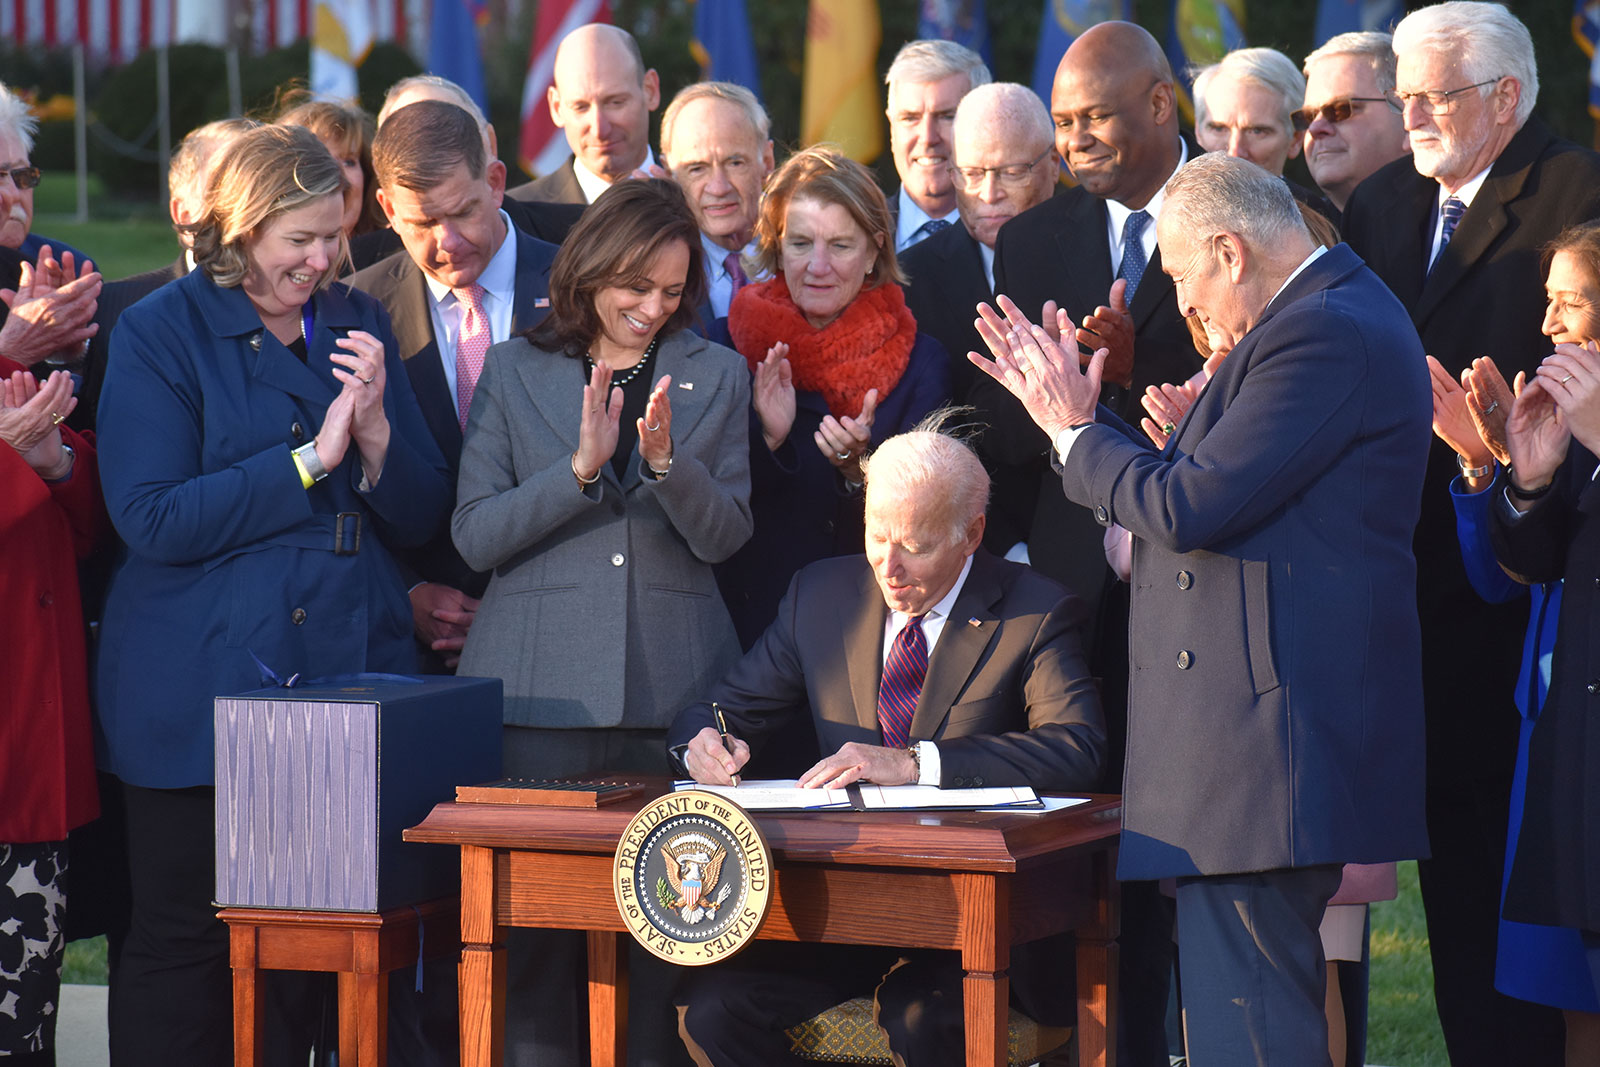 President of the United States Joe Biden signs the Bipartisan Infrastructure Deal, H.R. 3684, the Infrastructure Investment and Jobs Act into law at the White House in Washington, DC on November 15, 2021